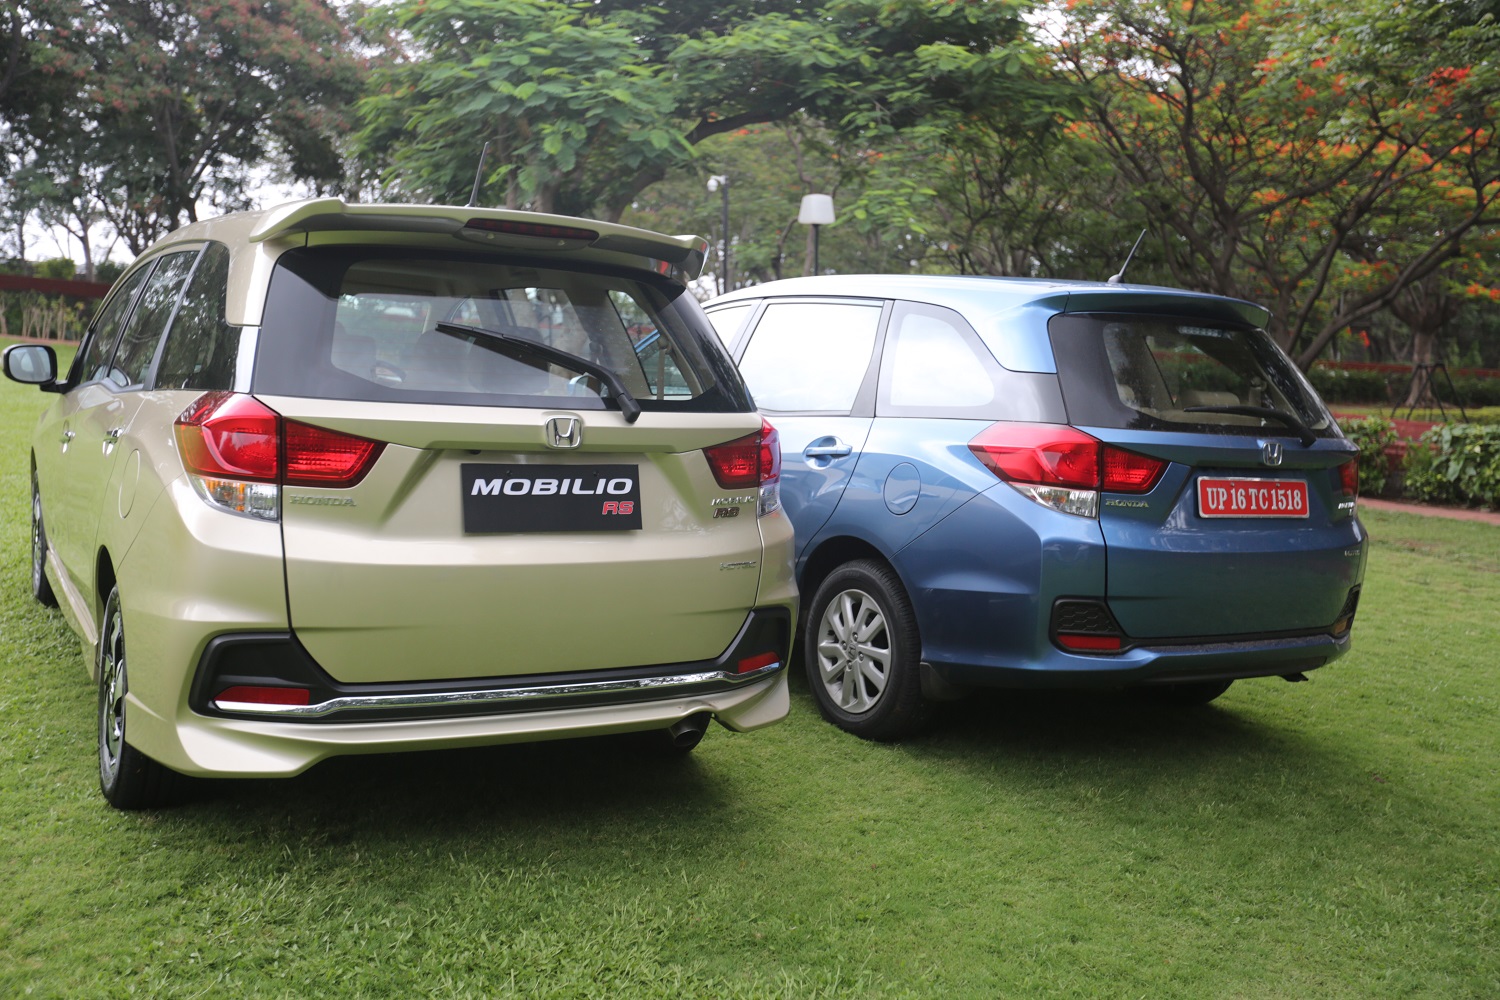 New 2014 Honda Mobilio: Difference between the RS and the normal